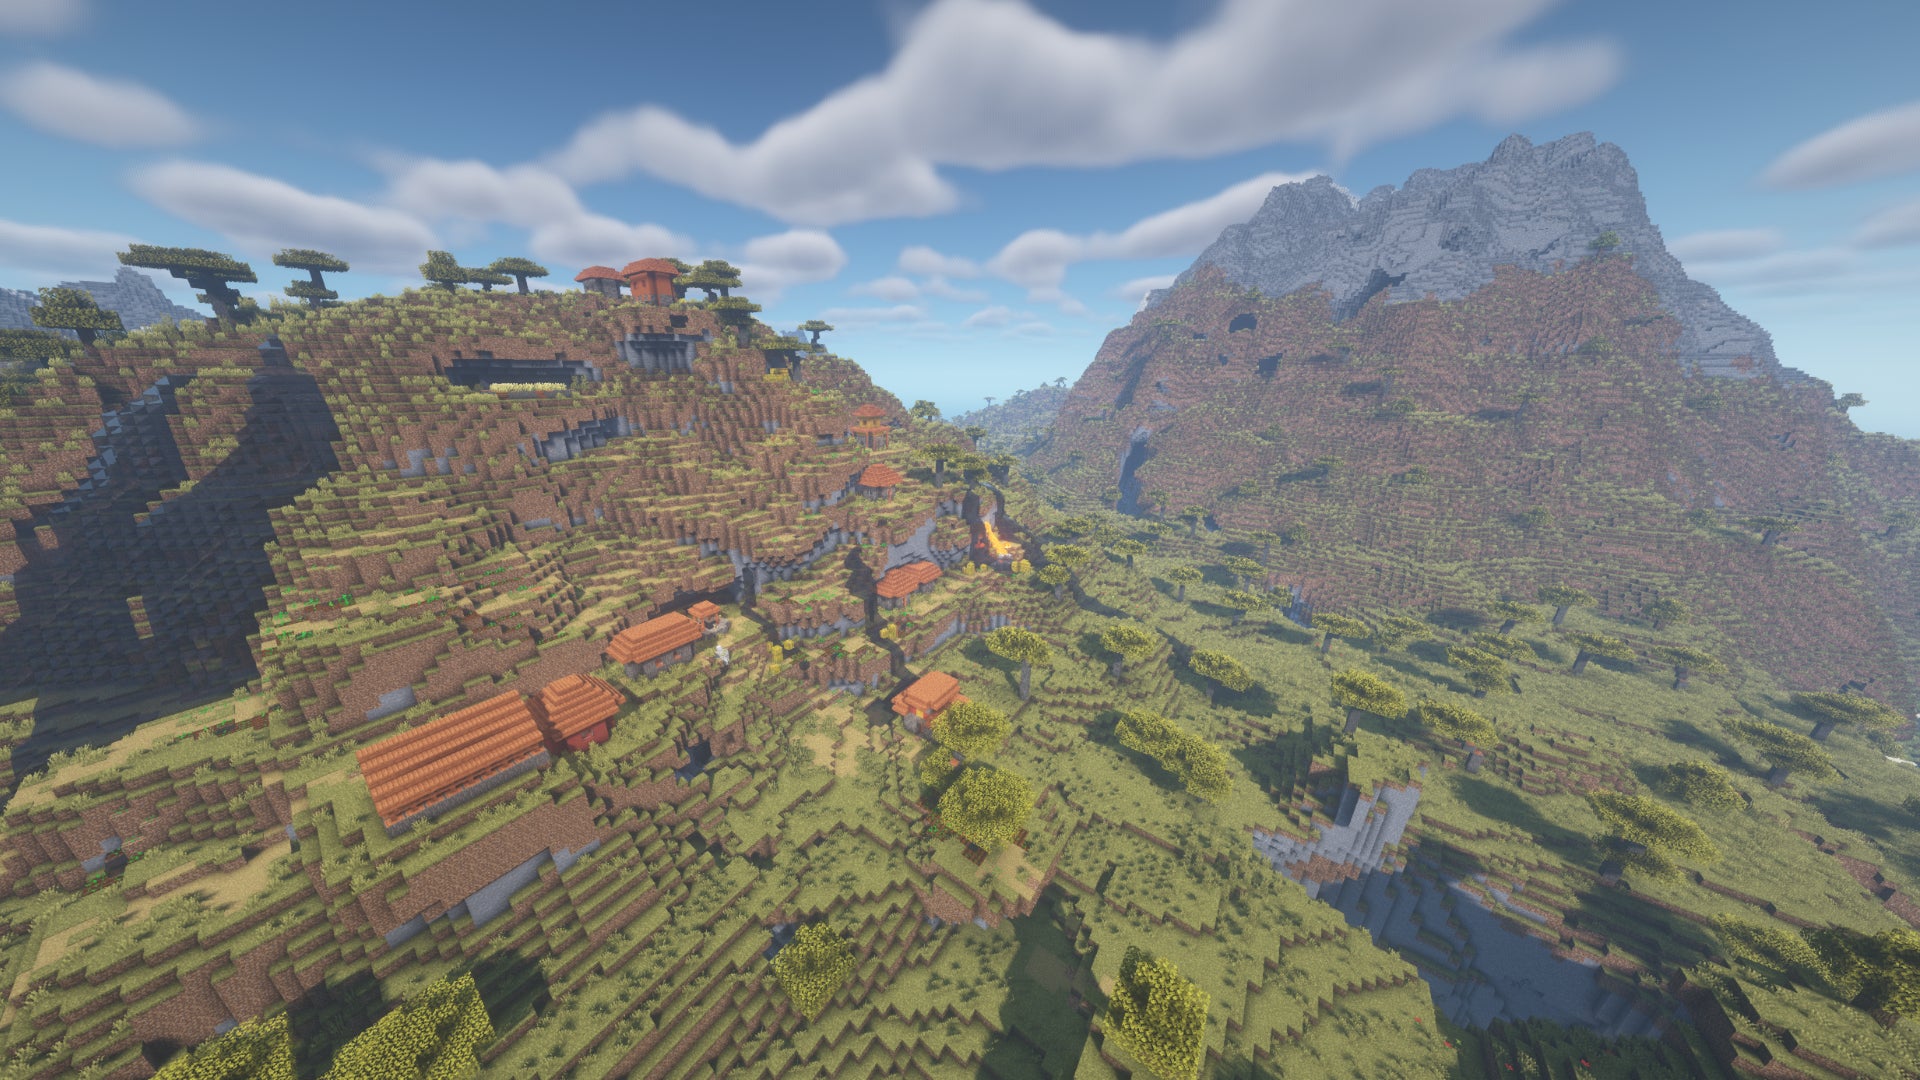 A Minecraft village built across the side of a savanna hill, with a large stone-topped mountain in the background.